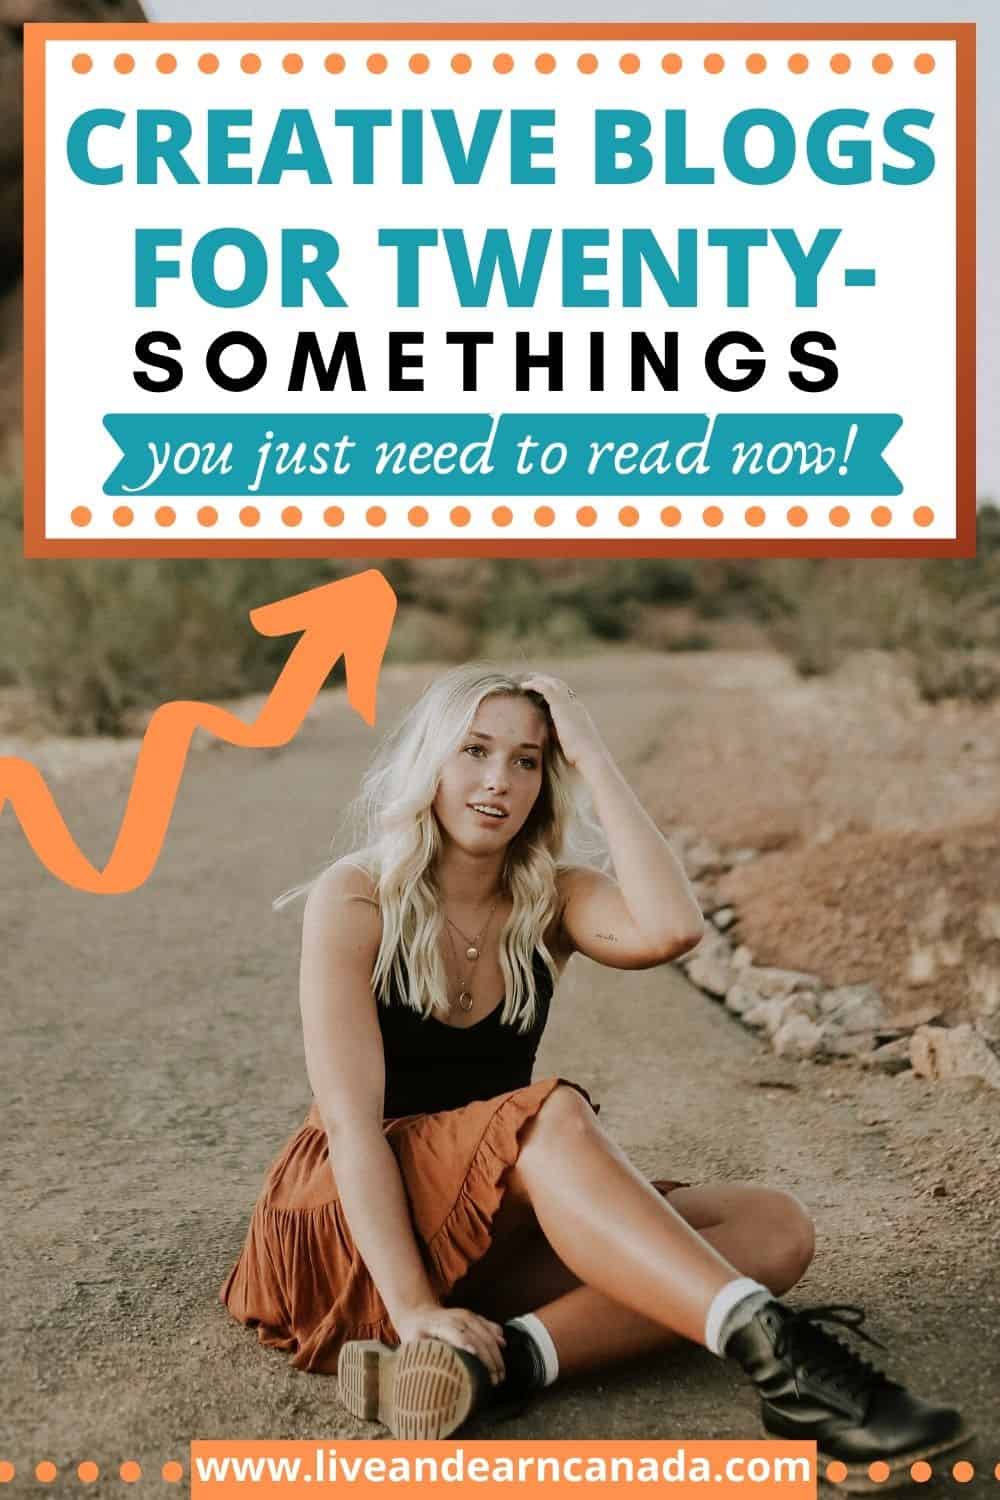 Here is a list of blogs you need to ready if you are twenty. If you are looking for the Best lifestyle blogs for 20 somethings, we have you covered! We have a list of great blogs that twenty something year olds can relate to! #twenties #twentyyearold